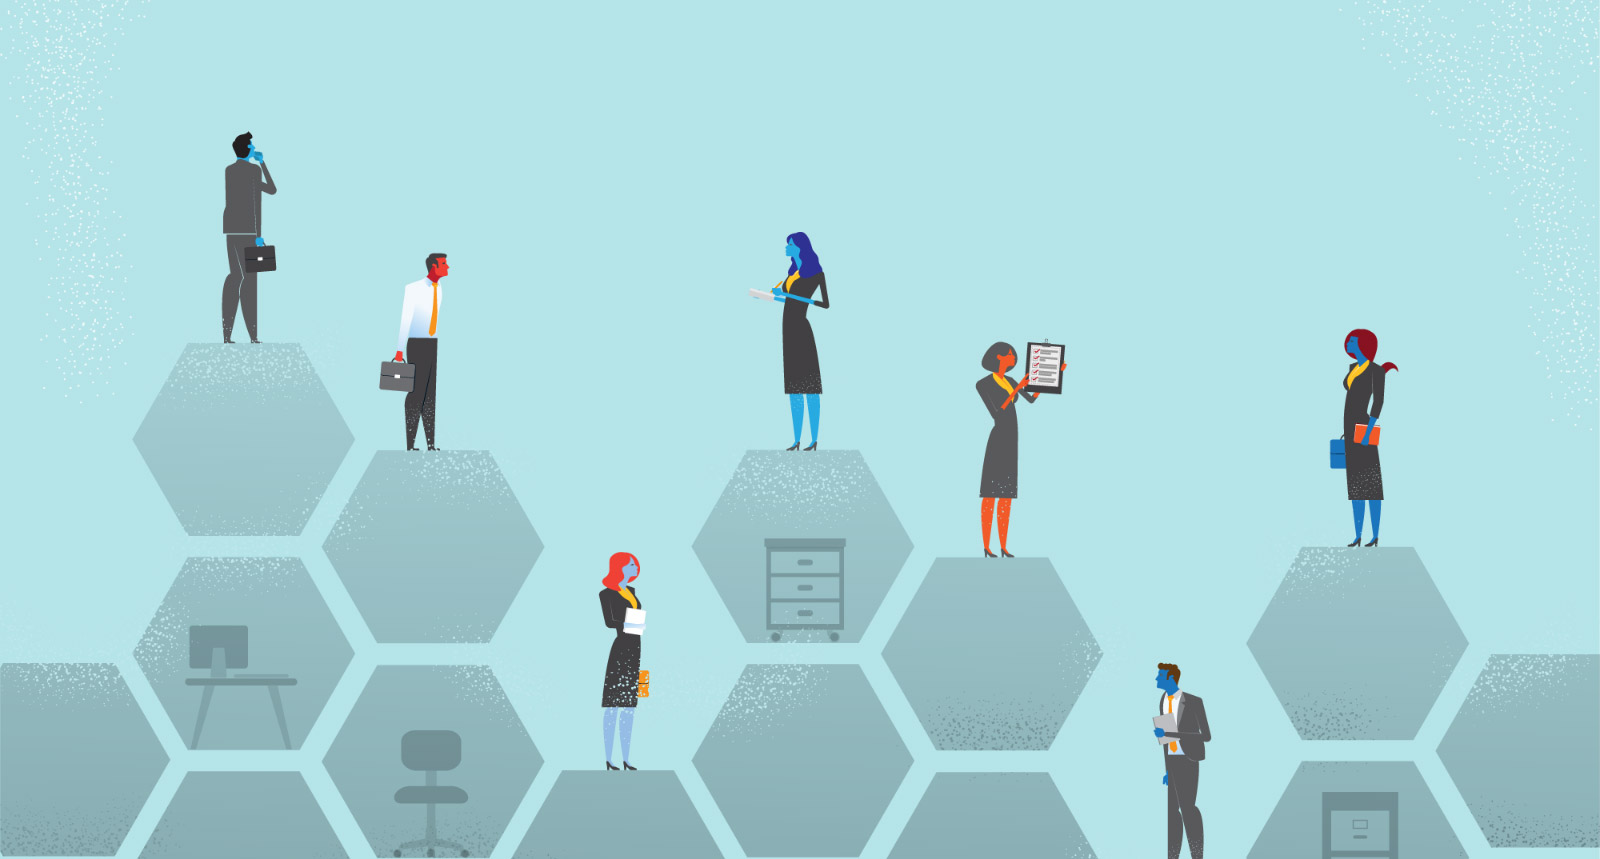 Blue hexagon illustration with business people